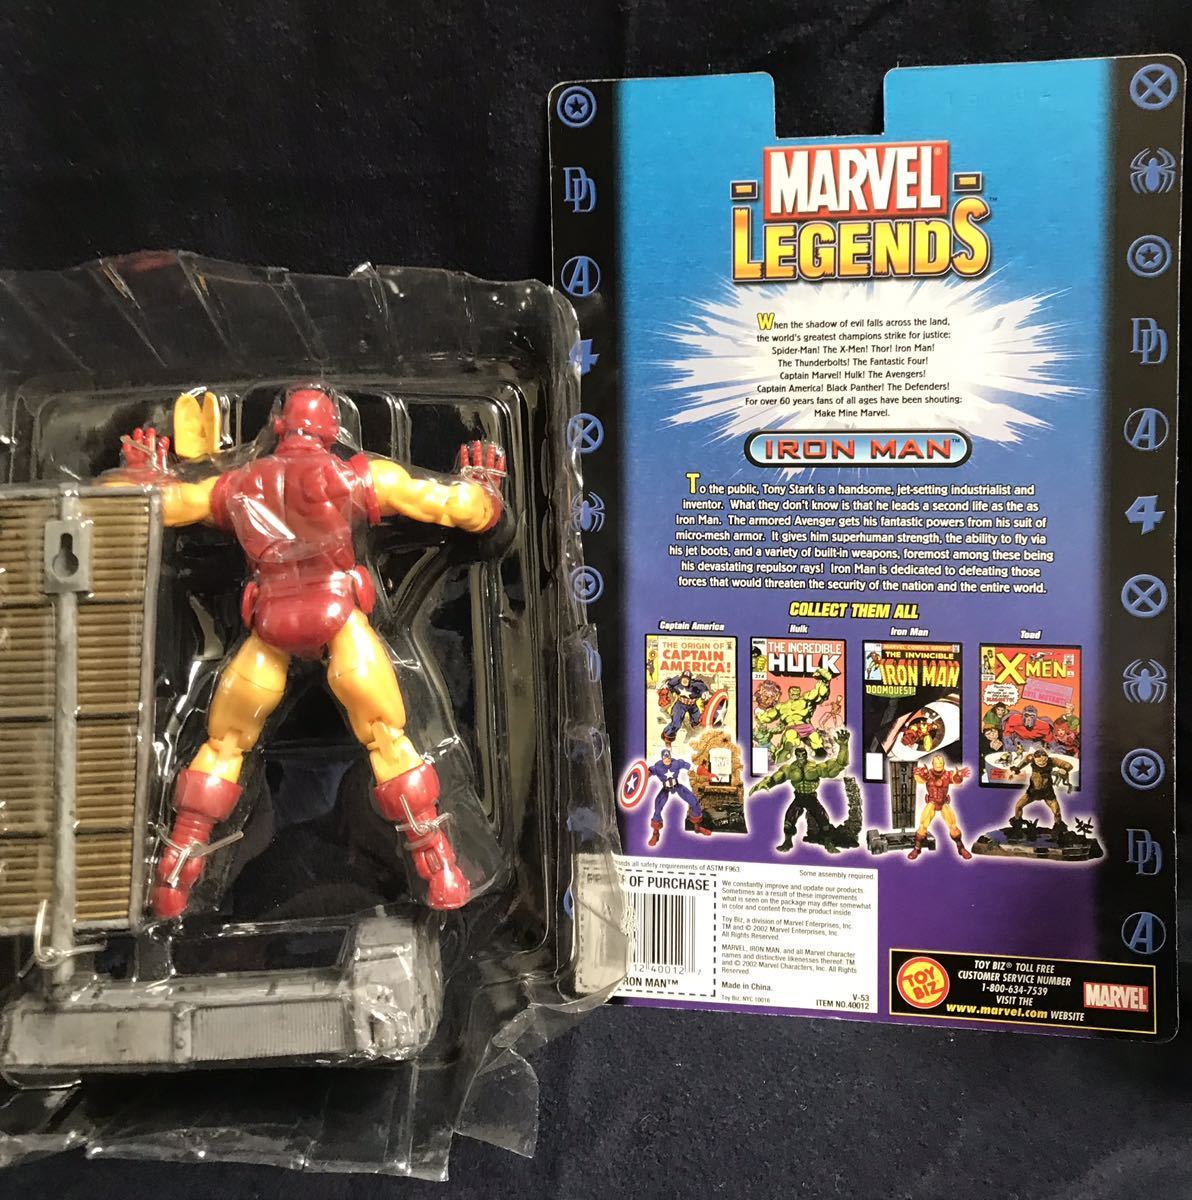 * toy biz[ma- bell Legend / MARVEL LEGENDS ][ IRON MAN / Ironman ]6 -inch figure * as good as new ( pack is breaking the seal ending )*